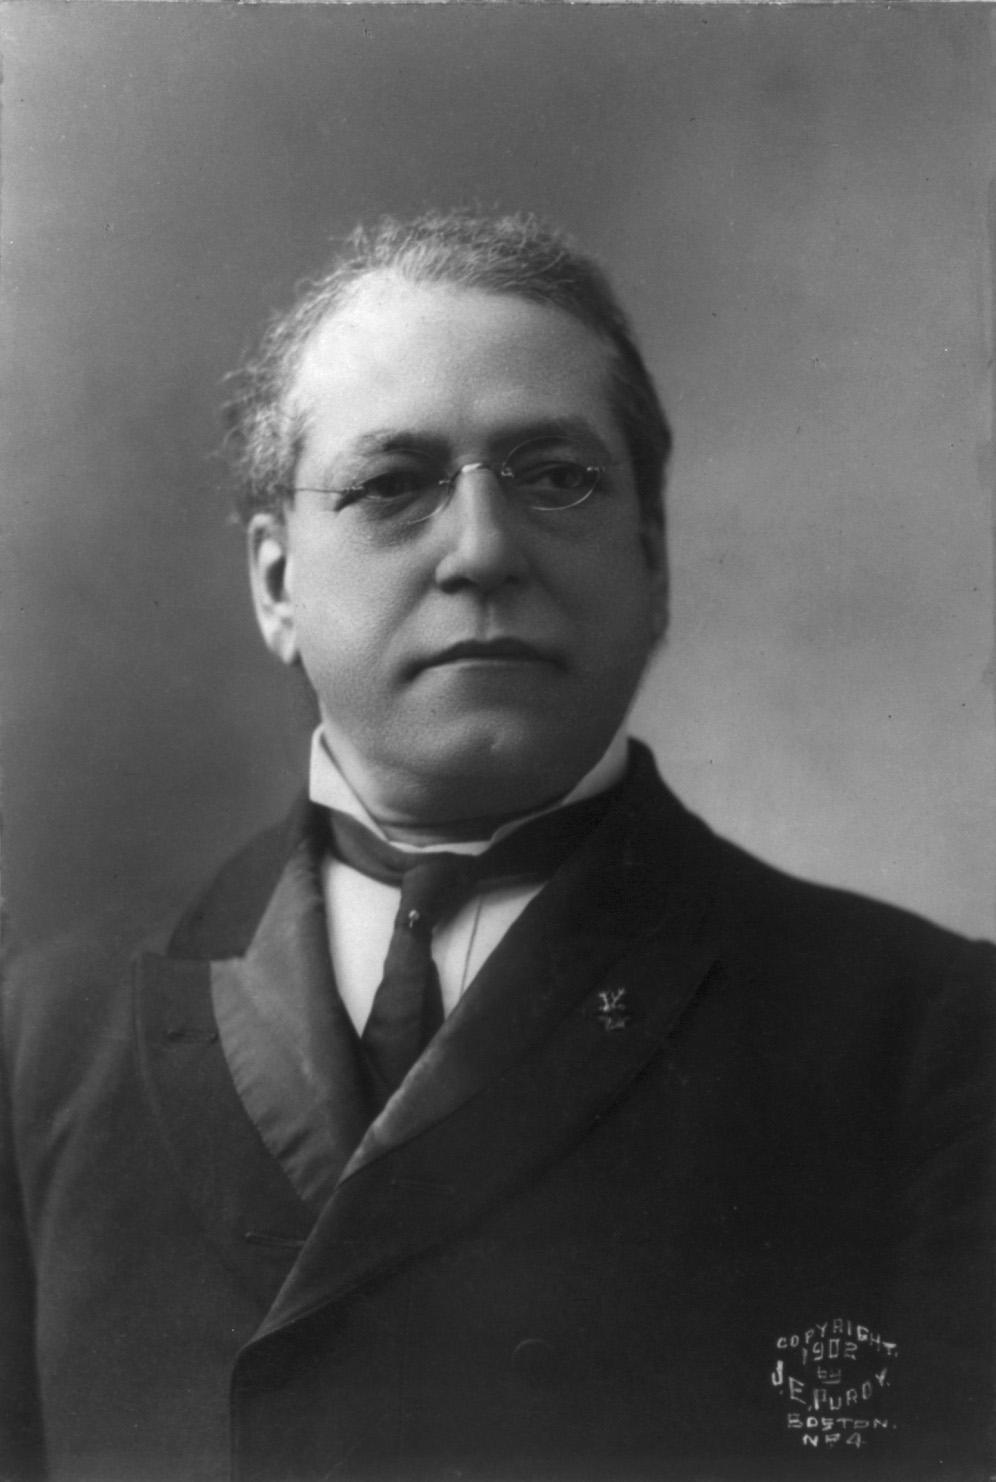 Craft Unionism Craft unions include skilled workers from one or more trades Samuel Gompers helps found American Federation of Labor (AFL) AFL strikes successfully, wins